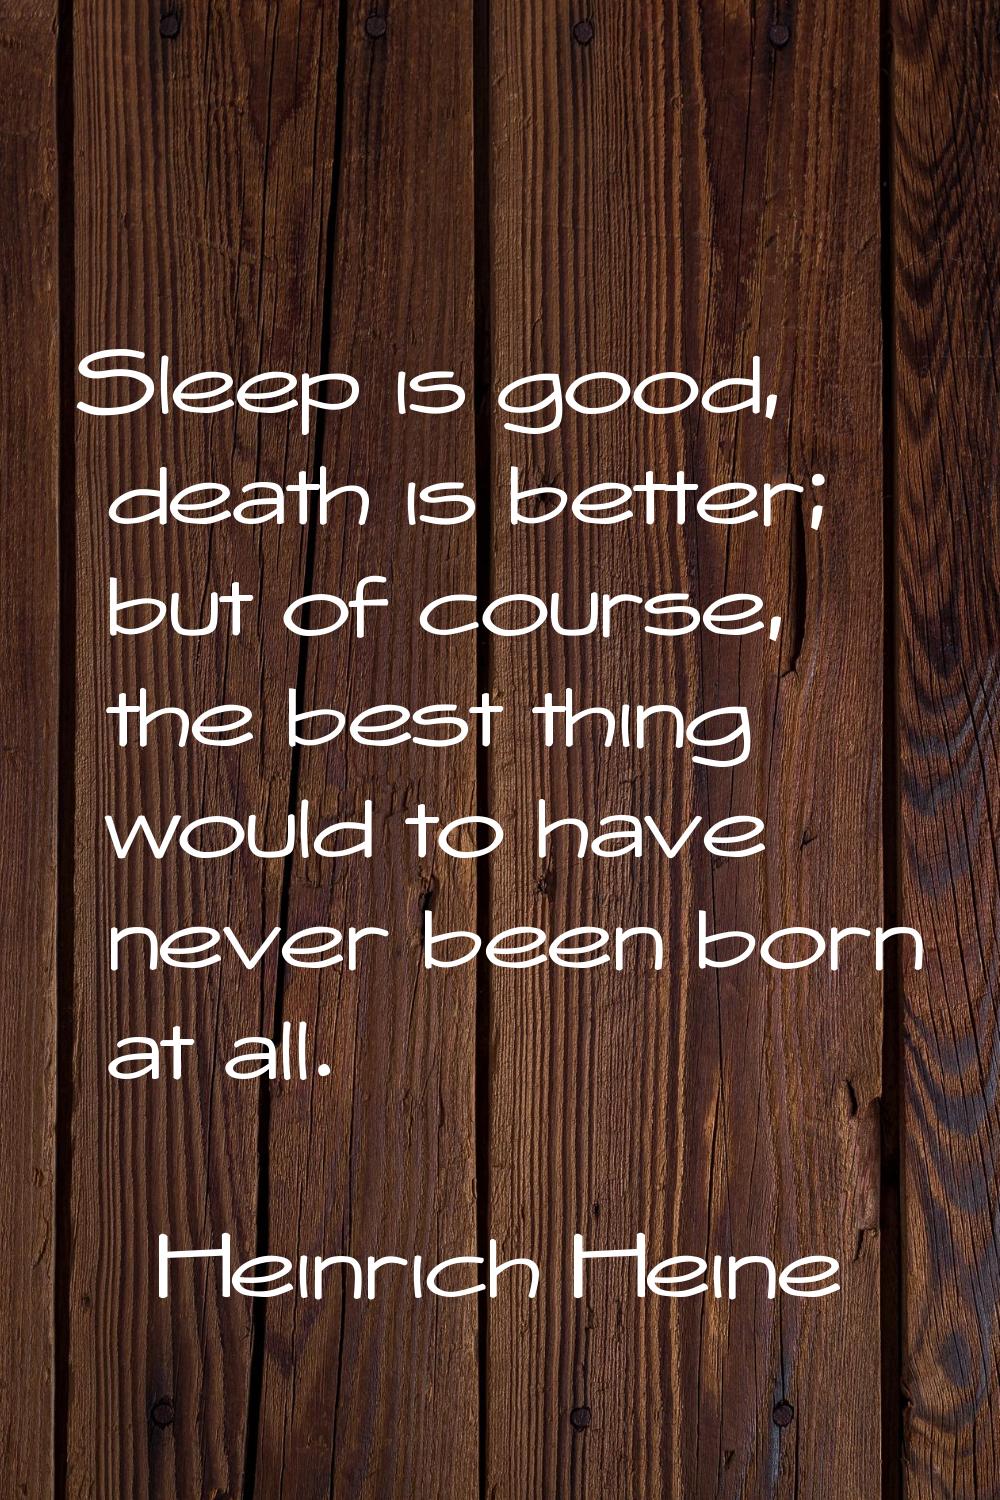 Sleep is good, death is better; but of course, the best thing would to have never been born at all.